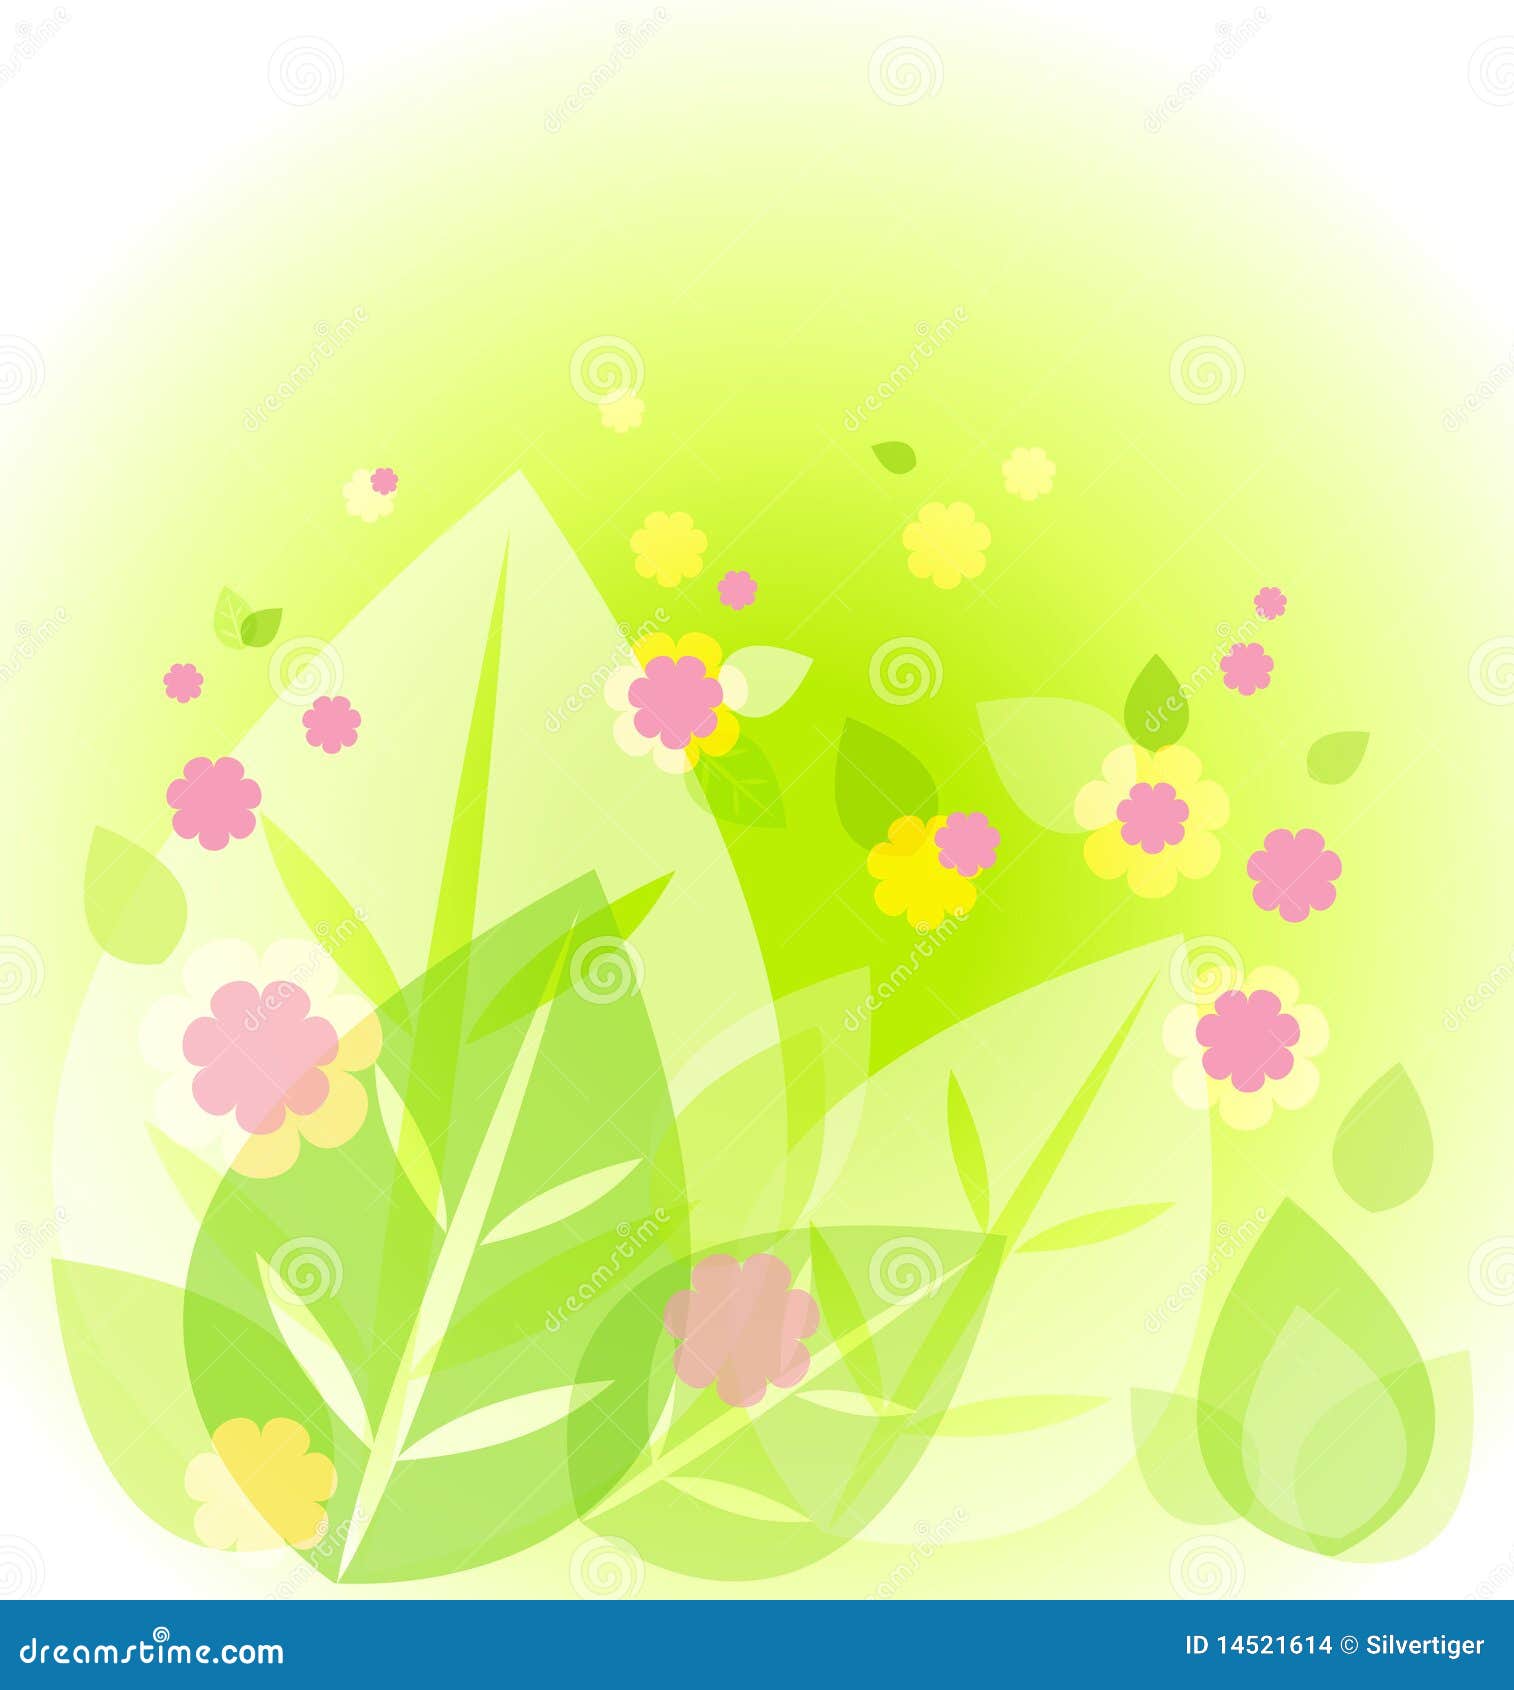 Abstract Cute Green Background Stock Vector - Image: 14521614